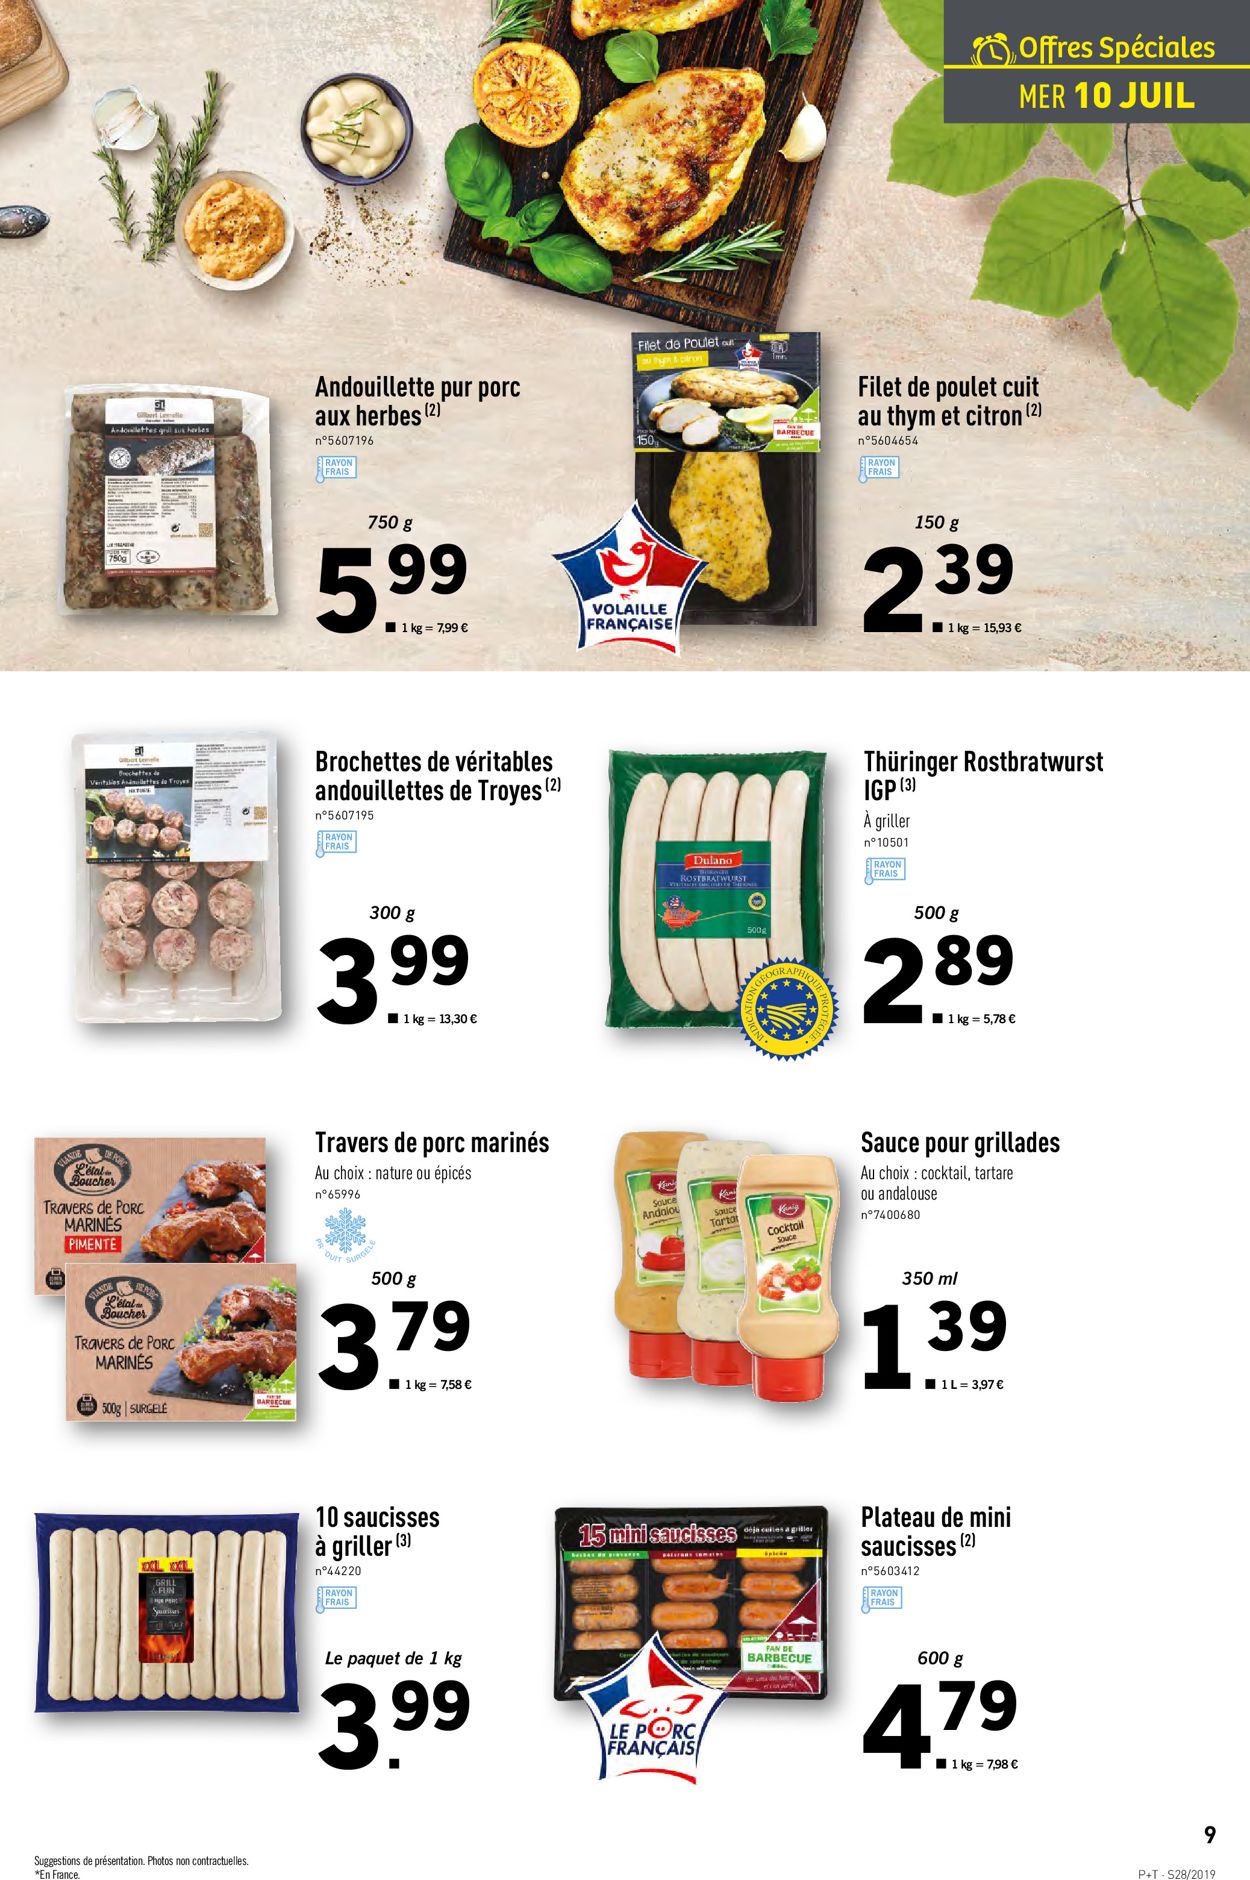 Lidl Catalogue - 10.07-16.07.2019 (Page 9)